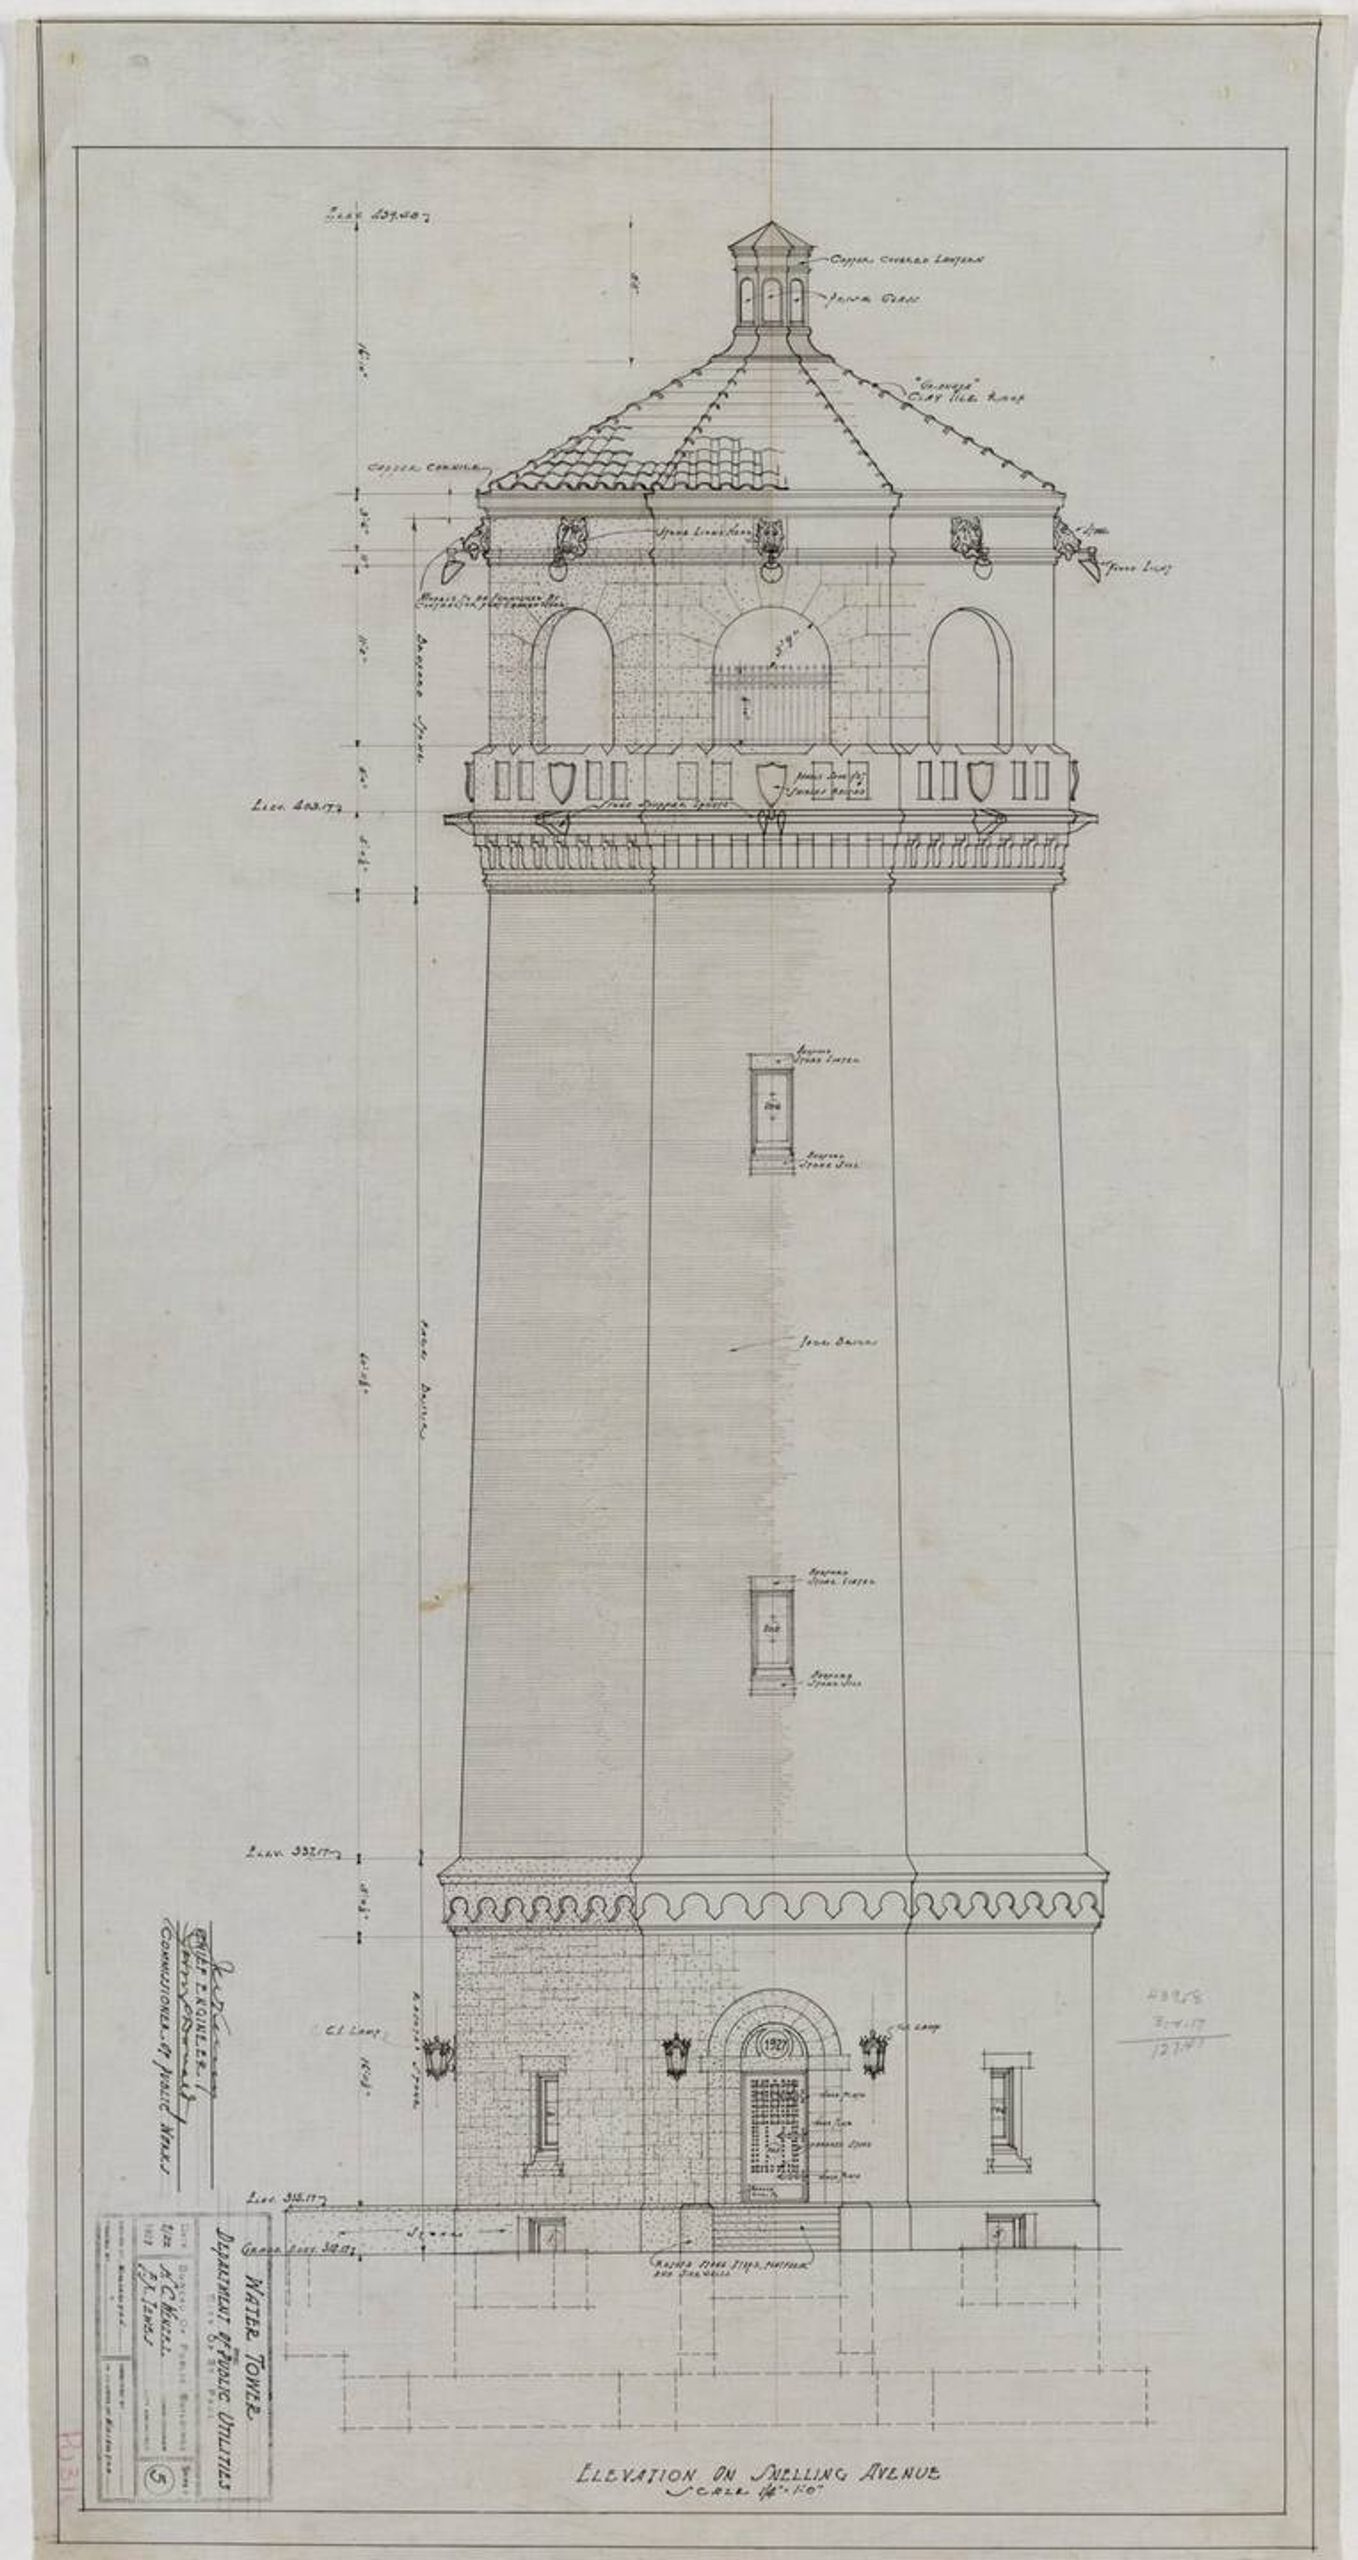 Architectural sketch by Clarence Wigington of Highland Park Water Tower